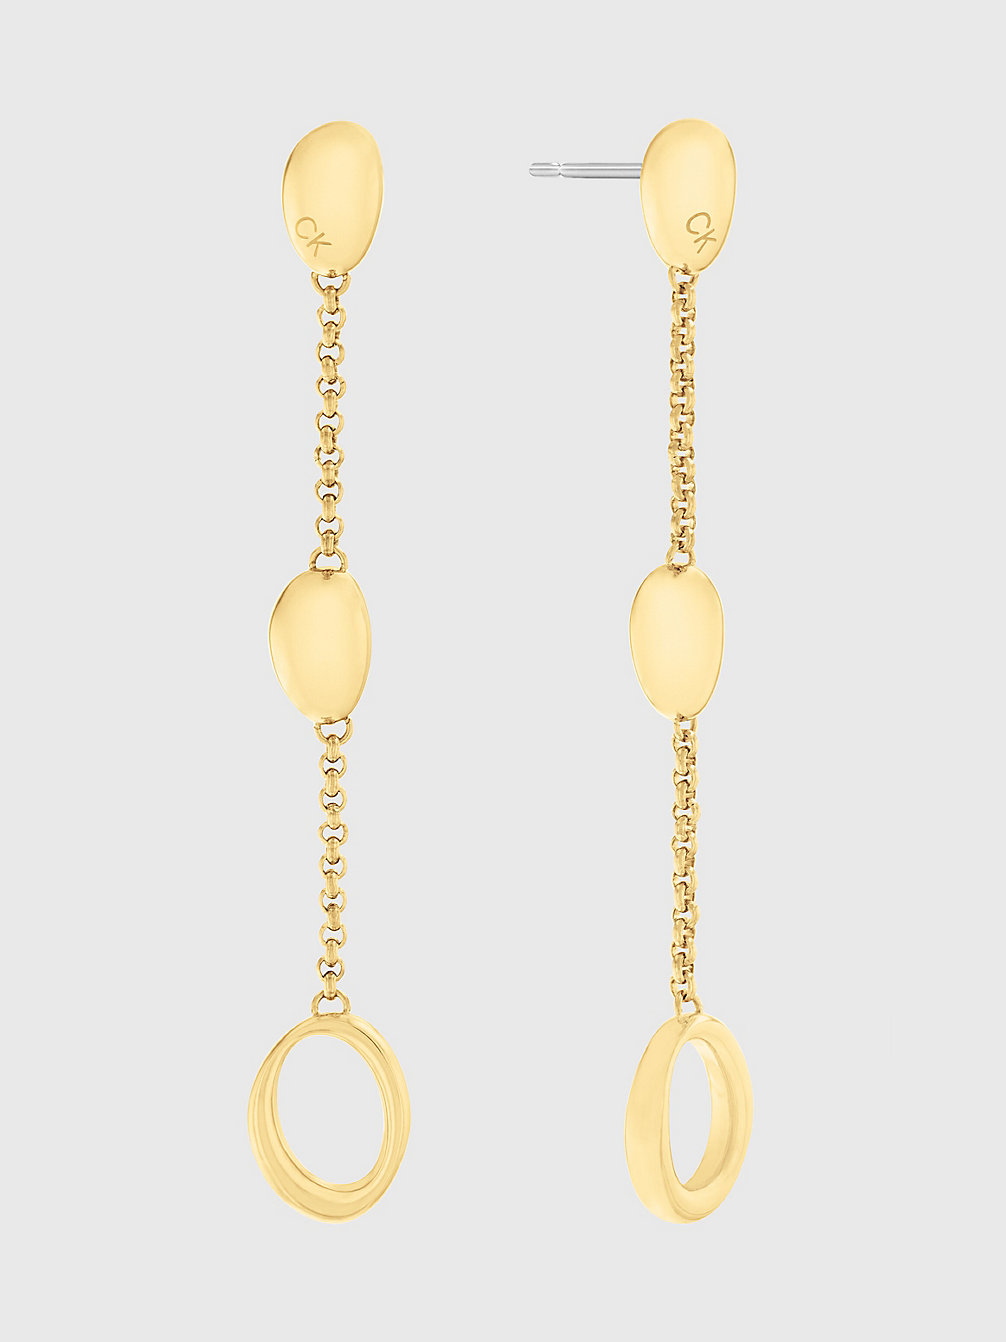 Orecchini - Playful Organic Shapes > GOLD > undefined donna > Calvin Klein